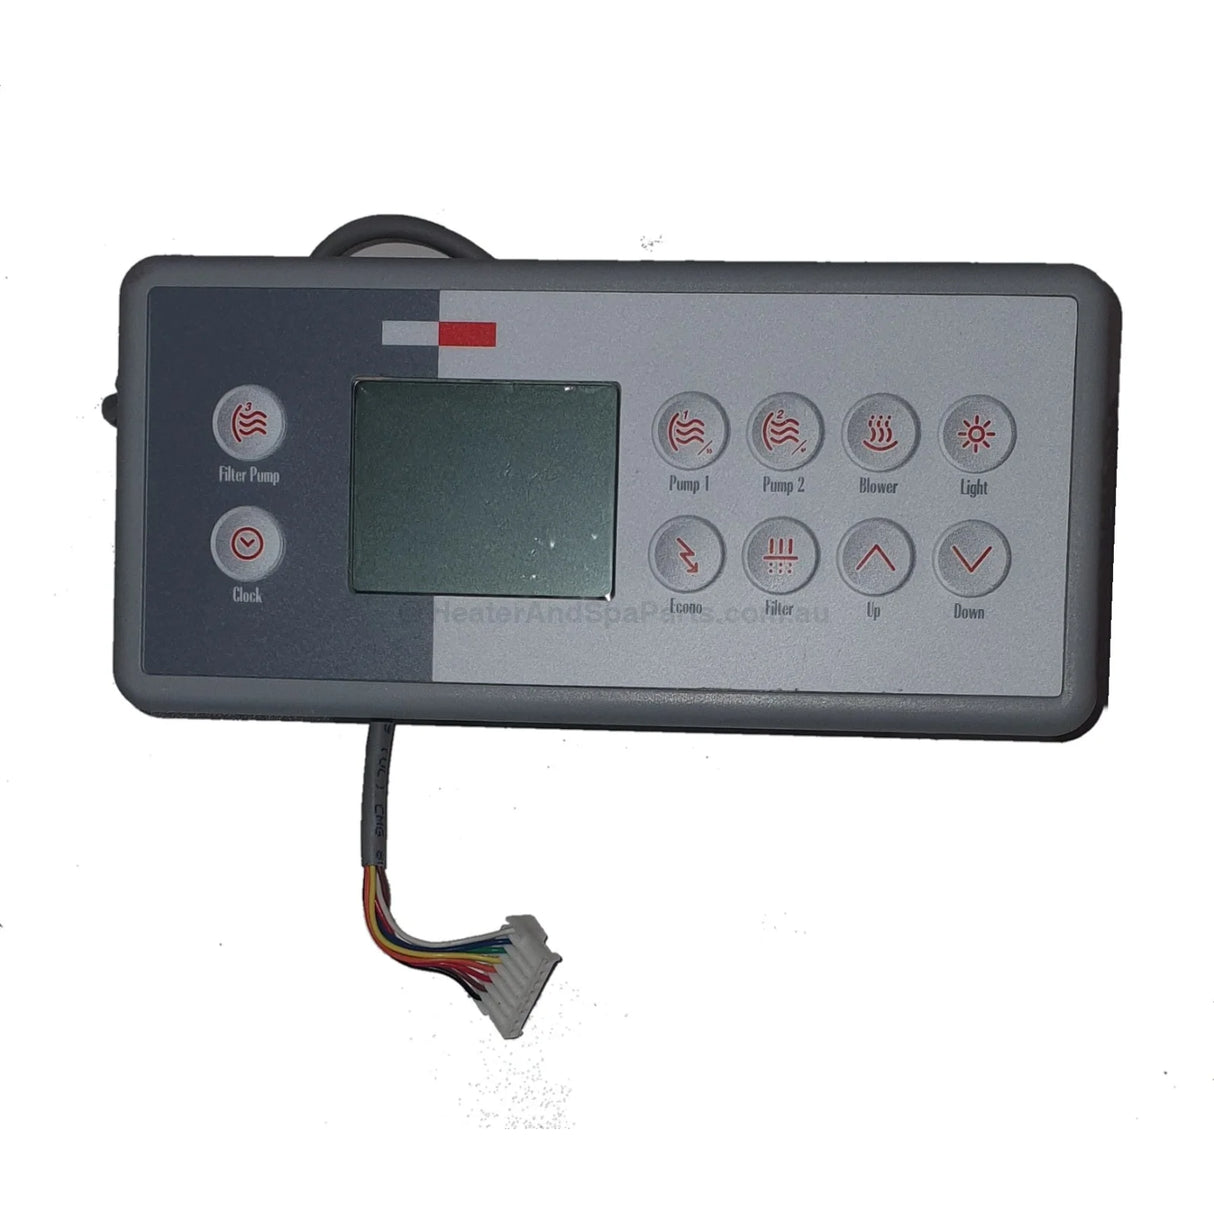 Gecko TSC-4 / K-4 Touchpad Control Panel with 10 Button Overlay - Heater and Spa Parts